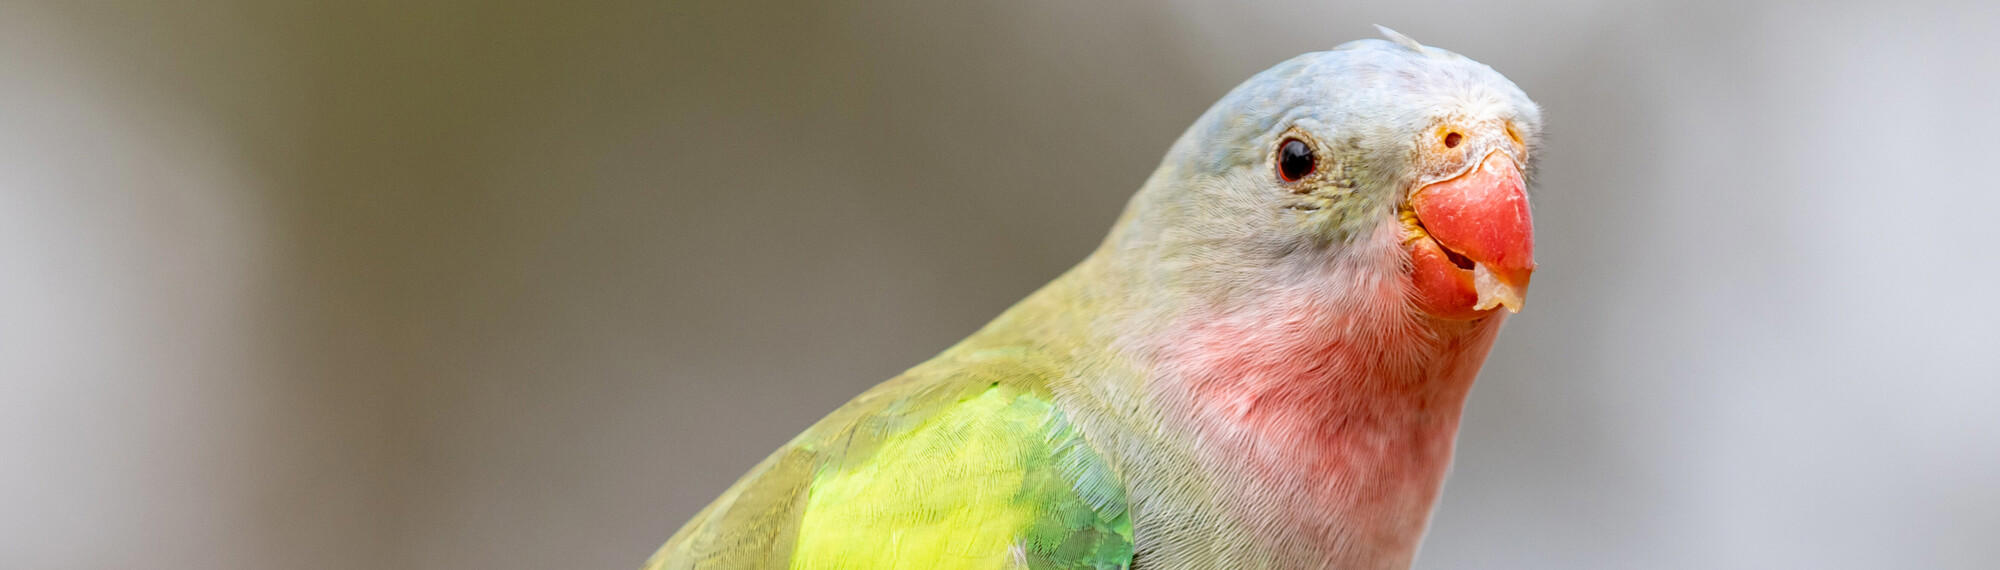 Close up view from chest high view of a Princess Parrot, with its yellow, green, pink and blue feathers and a piece of food in its bright orange beak